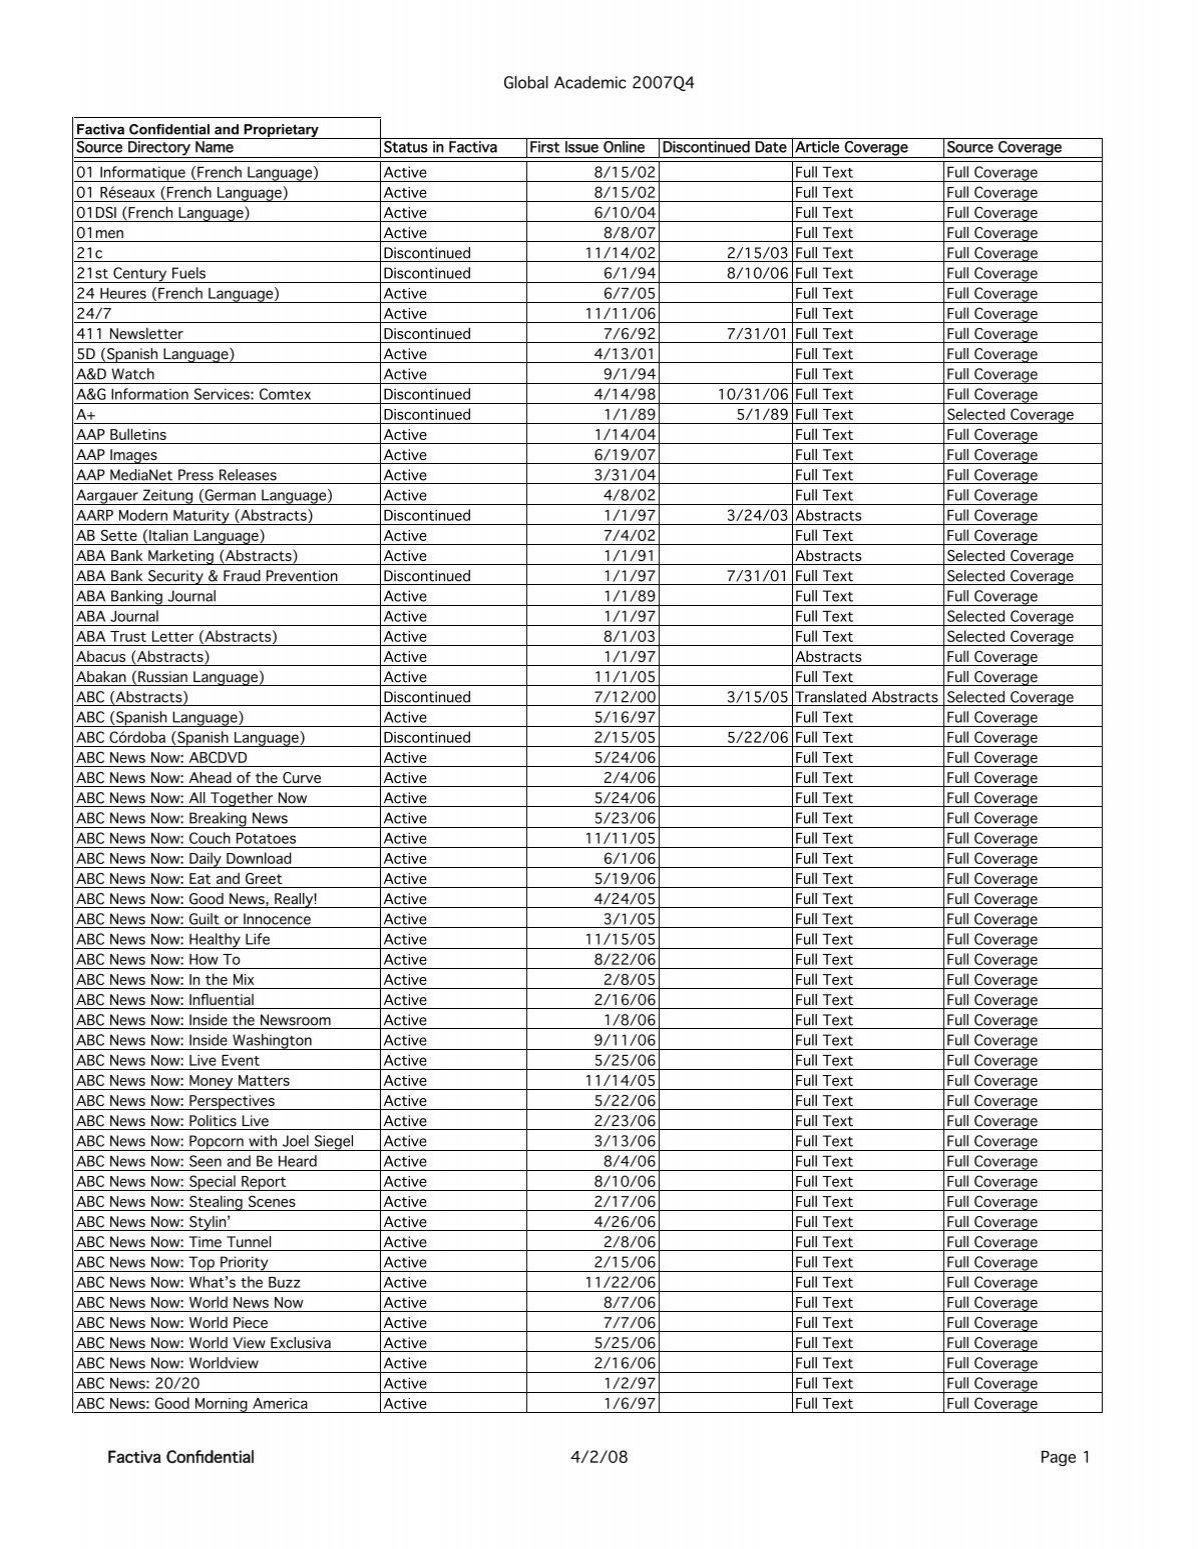 Global Academic 2007q4 Factiva Confidential 4 2 08 Page 1